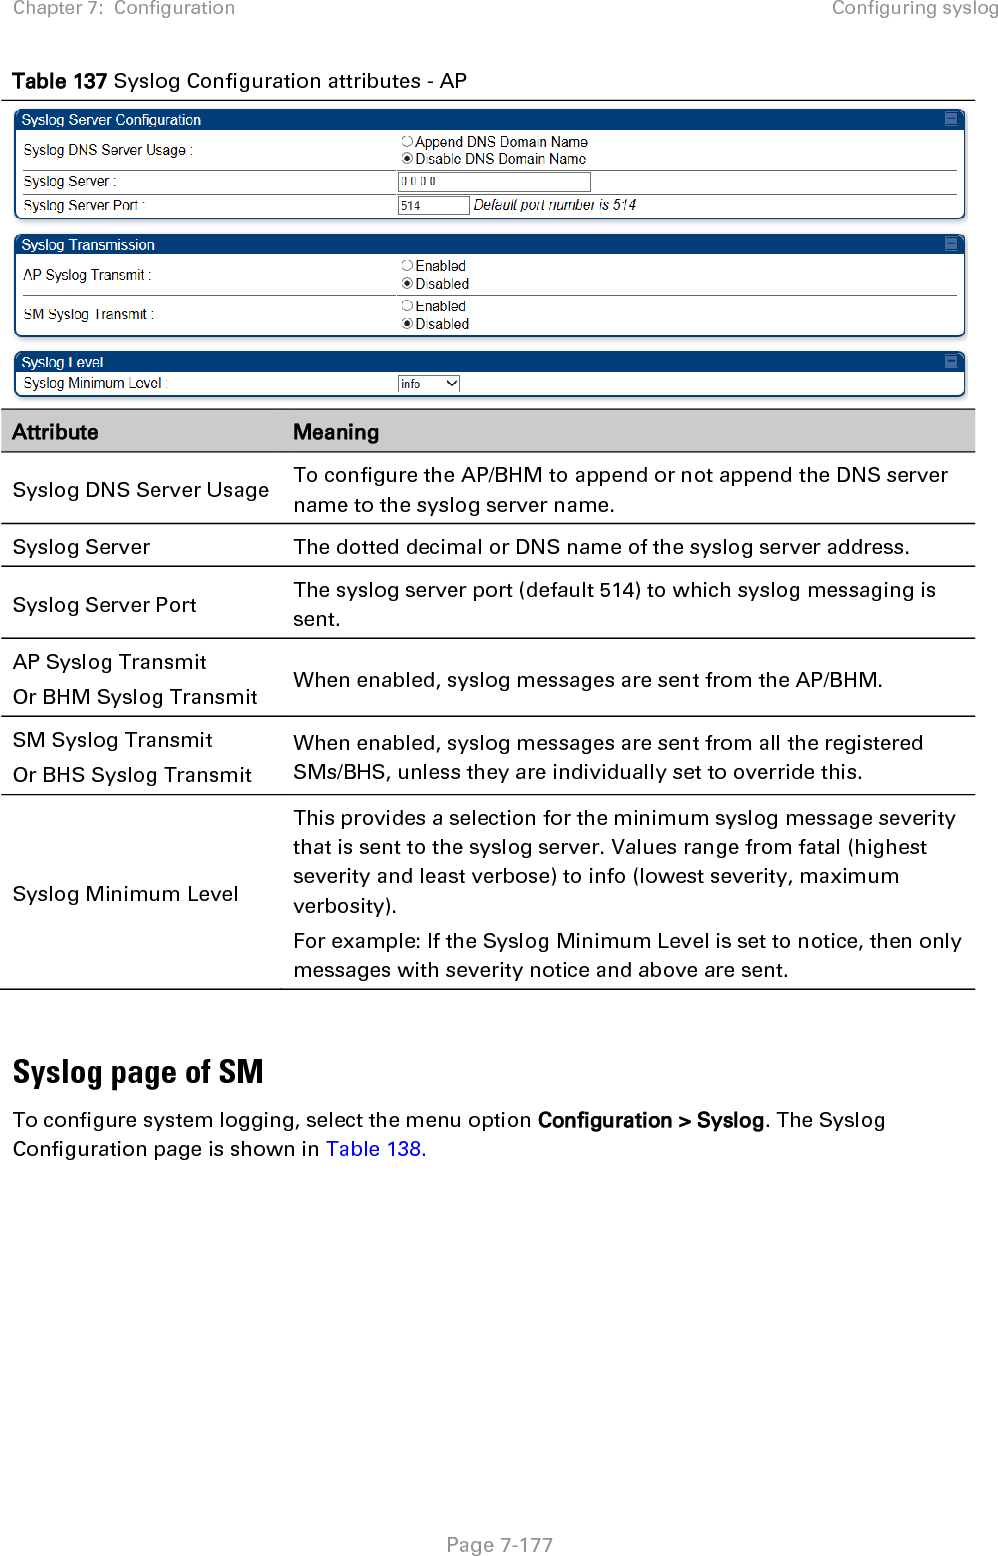 Chapter 7:  Configuration Configuring syslog   Page 7-177 Table 137 Syslog Configuration attributes - AP  Attribute Meaning Syslog DNS Server Usage  To configure the AP/BHM to append or not append the DNS server name to the syslog server name.  Syslog Server  The dotted decimal or DNS name of the syslog server address.  Syslog Server Port  The syslog server port (default 514) to which syslog messaging is sent.  AP Syslog Transmit  Or BHM Syslog Transmit When enabled, syslog messages are sent from the AP/BHM. SM Syslog Transmit  Or BHS Syslog Transmit  When enabled, syslog messages are sent from all the registered SMs/BHS, unless they are individually set to override this.  Syslog Minimum Level This provides a selection for the minimum syslog message severity that is sent to the syslog server. Values range from fatal (highest severity and least verbose) to info (lowest severity, maximum verbosity). For example: If the Syslog Minimum Level is set to notice, then only messages with severity notice and above are sent.  Syslog page of SM To configure system logging, select the menu option Configuration &gt; Syslog. The Syslog Configuration page is shown in Table 138. 